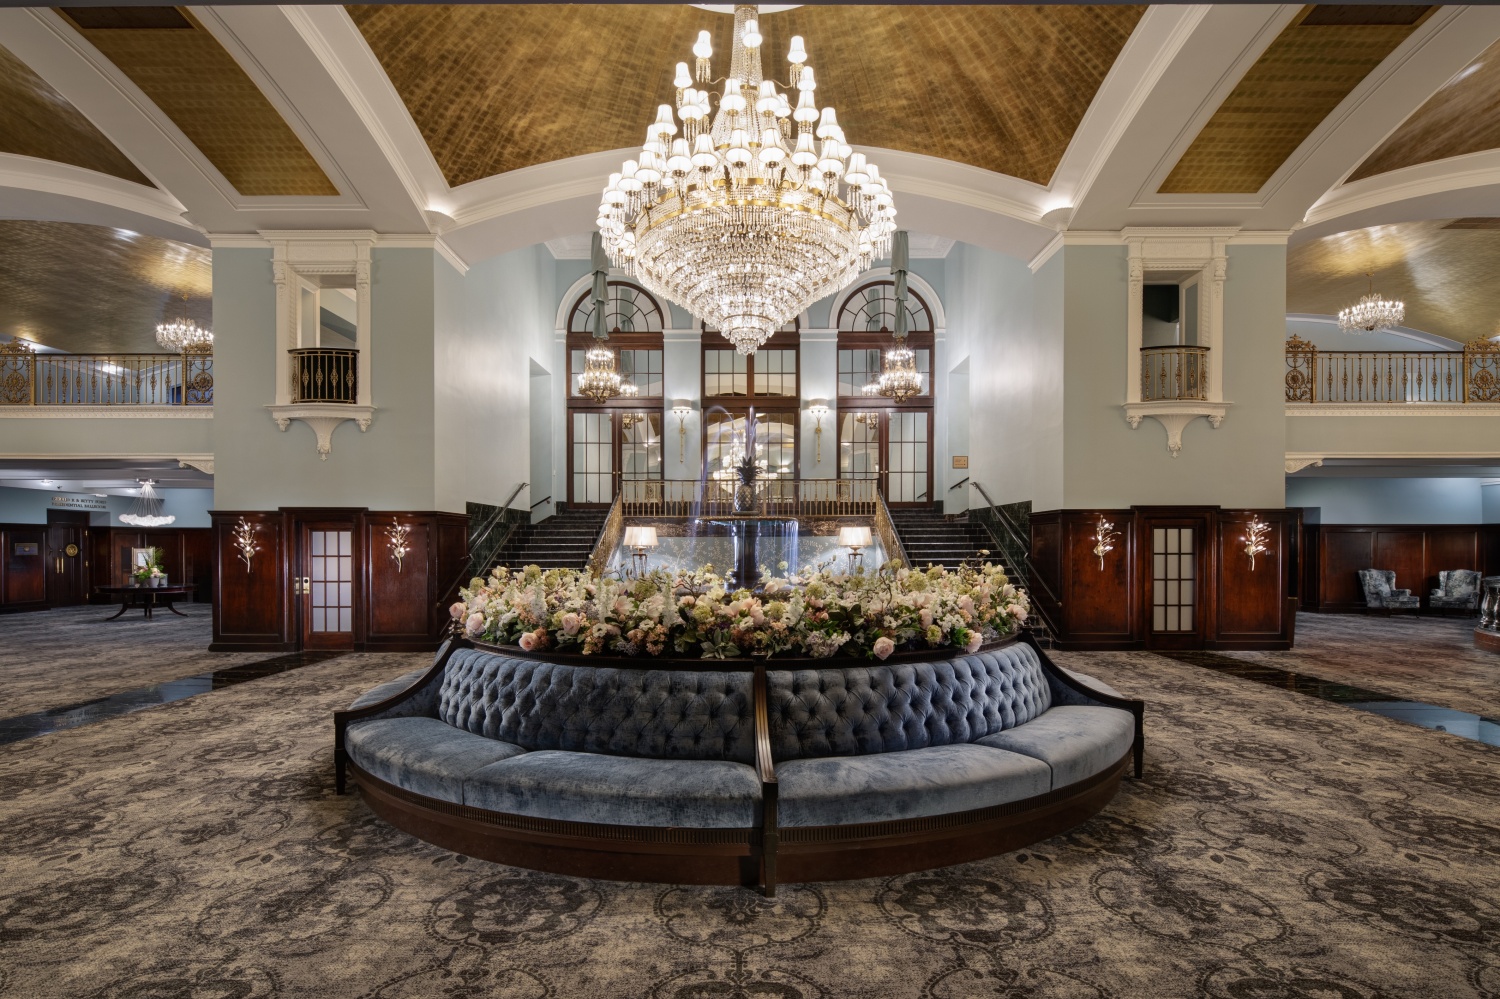 Amway Grand_Pantlind Lobby_Fountain_Chandelier_Lamps_Stairs_Mirrors_Grandfather Clock_Flowers_Water